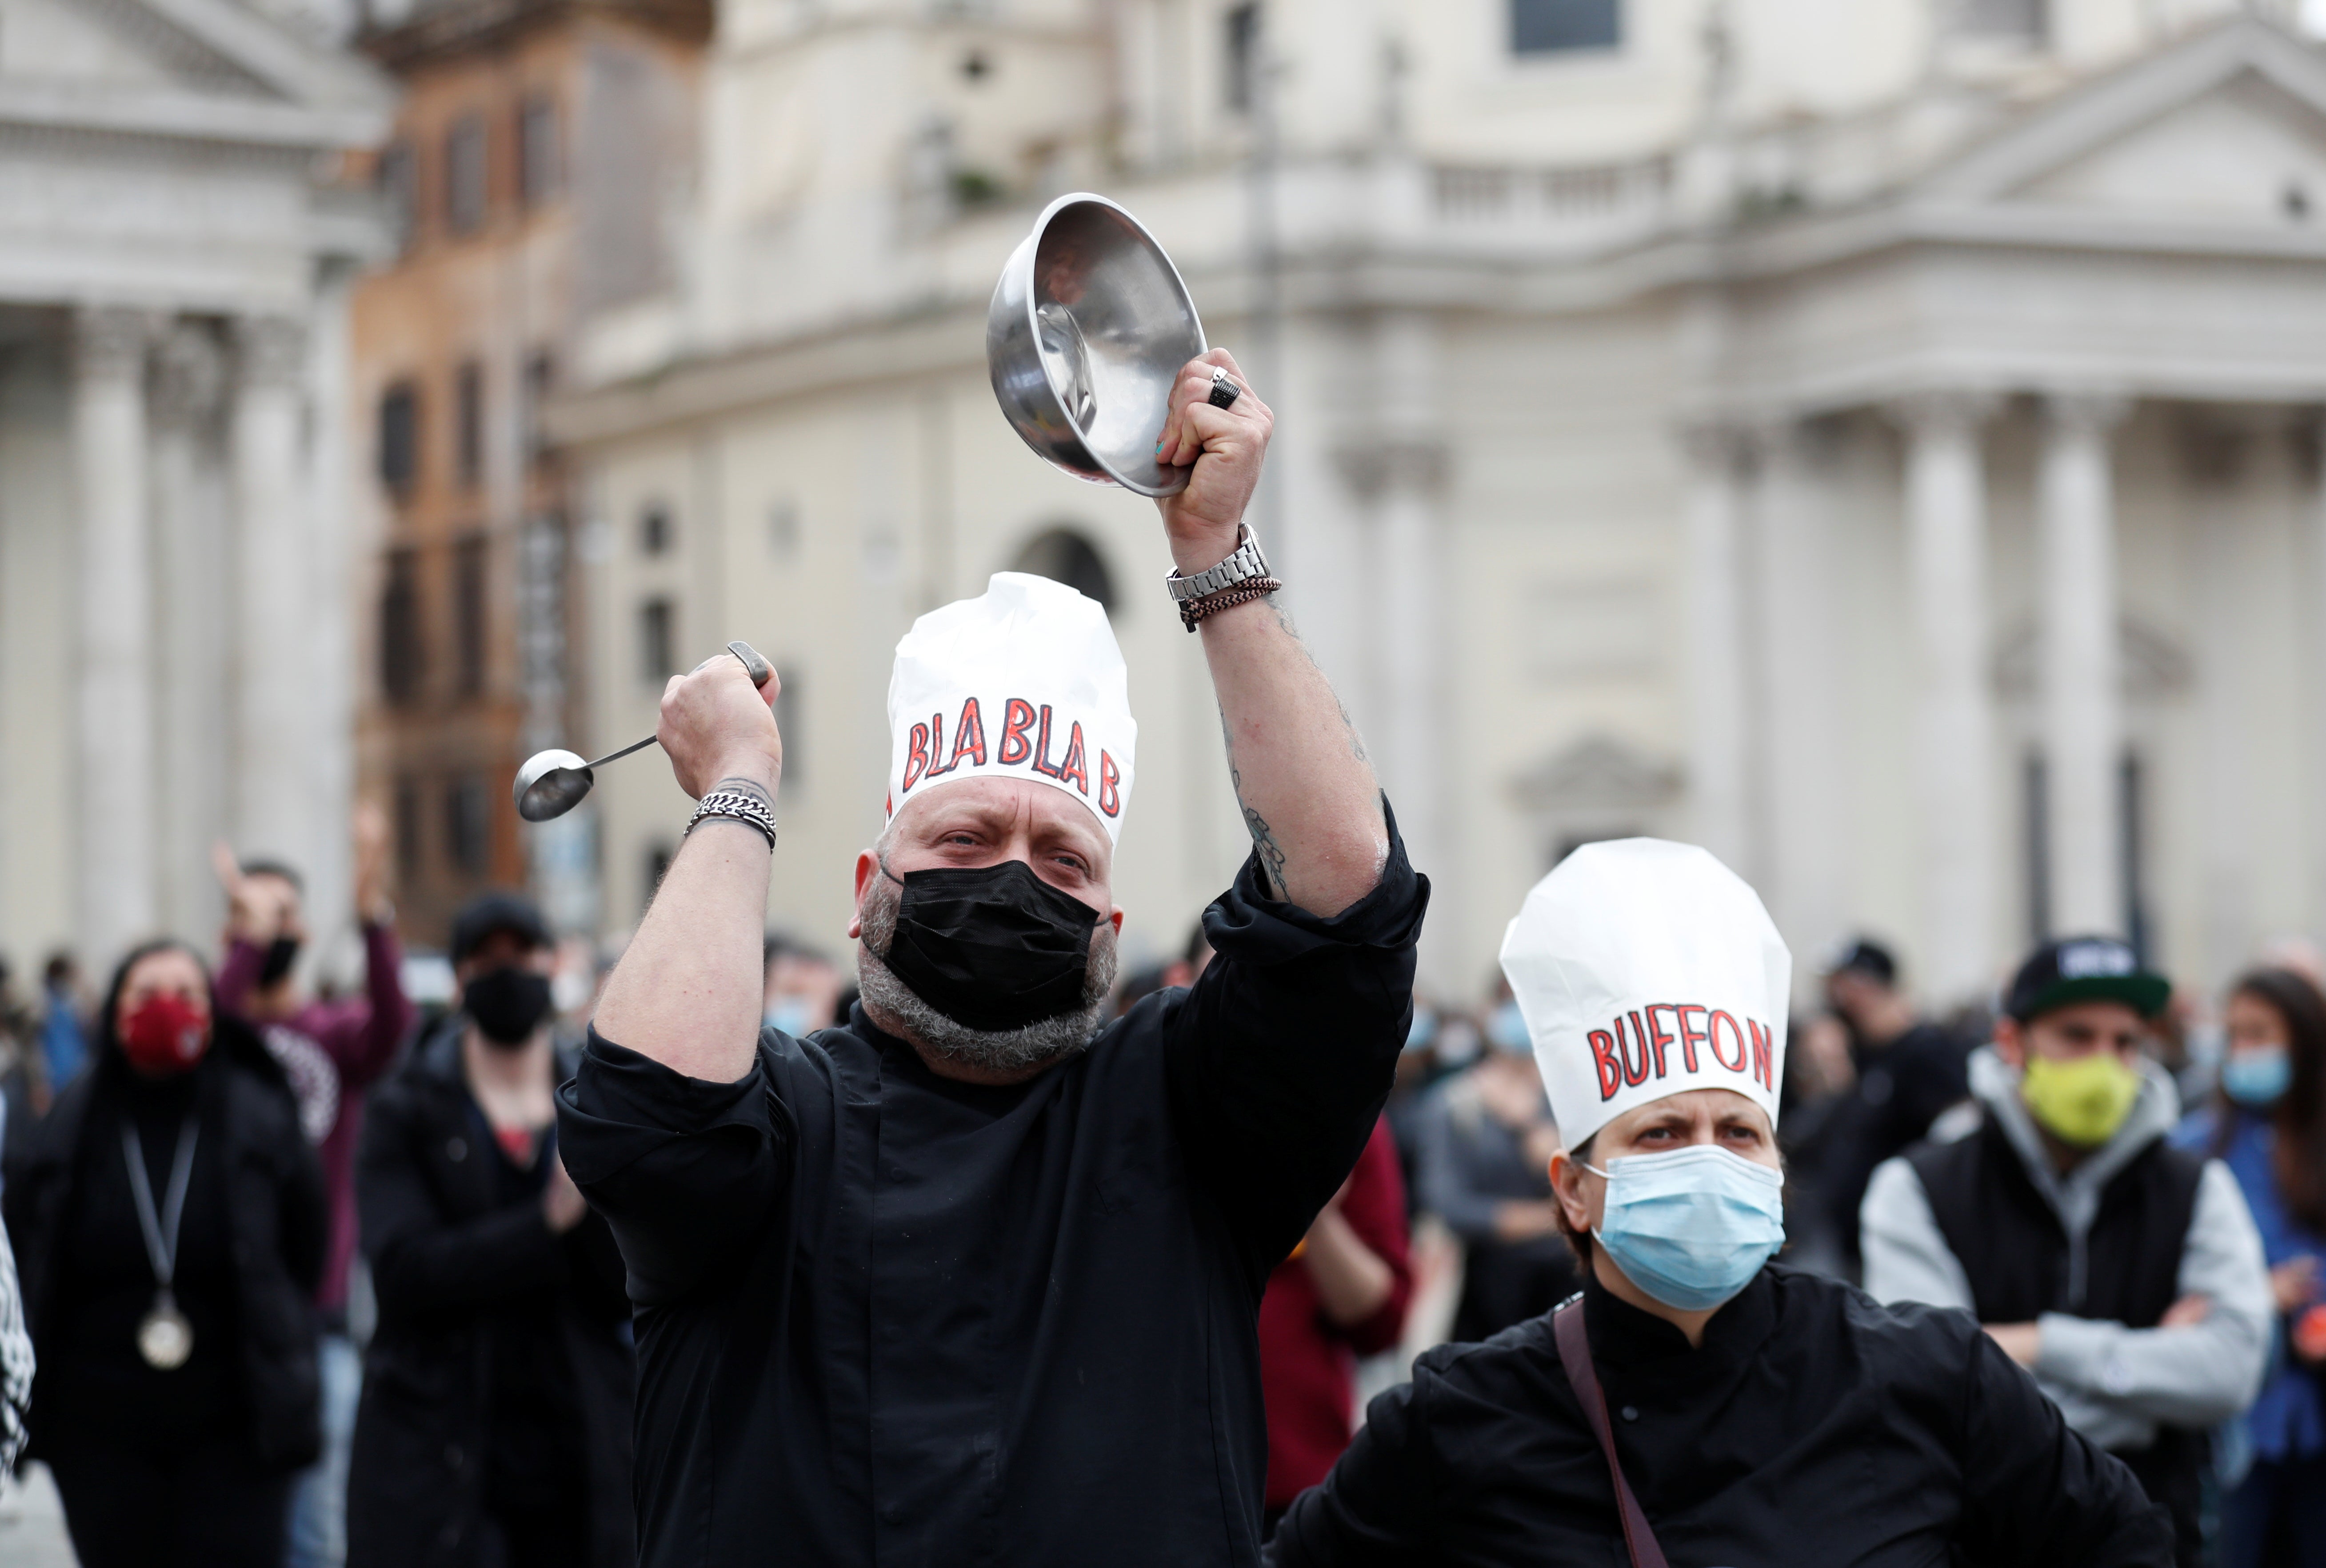 Italian restaurant and bar workers gather in Piazza del Popolo to protest against the government's social distancing rules